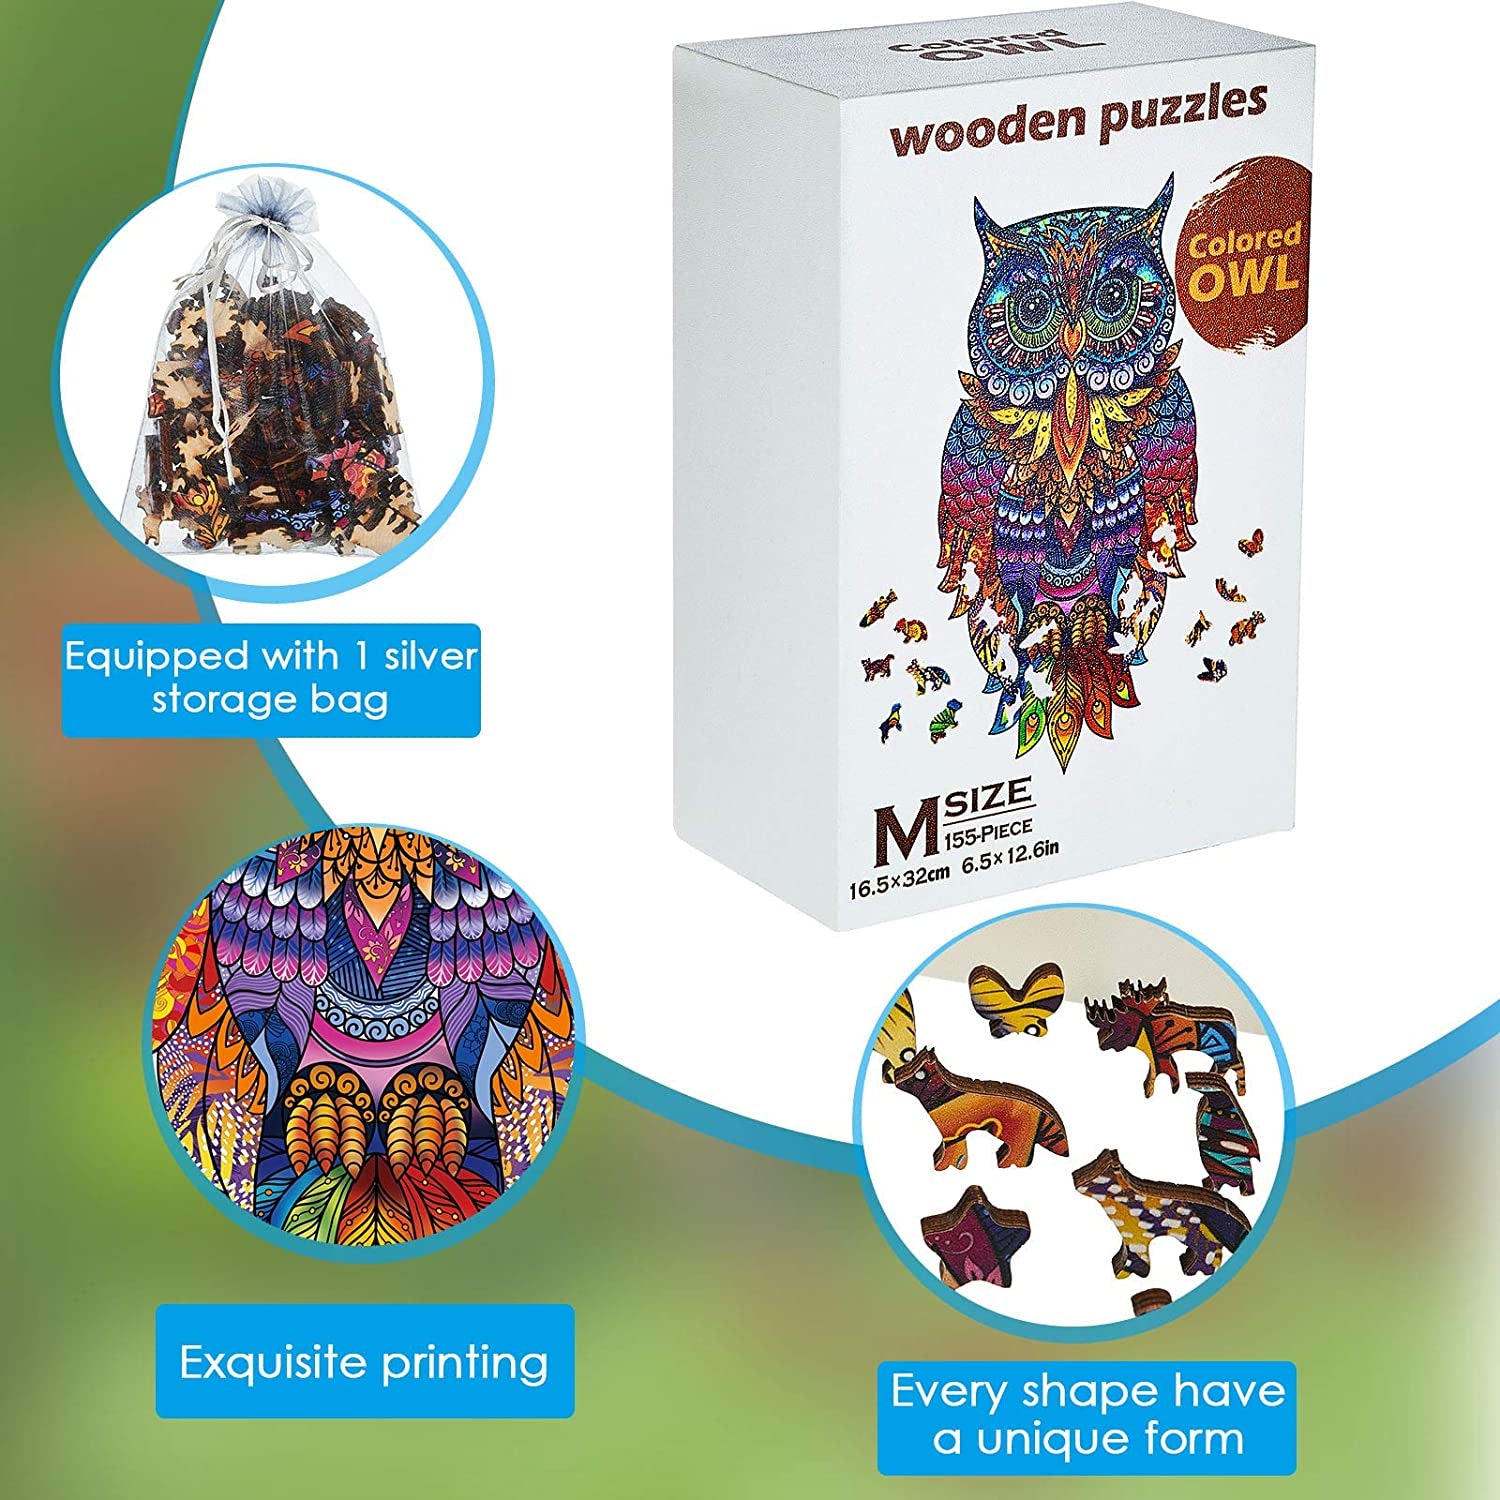 Owl Wooden Jigsaw Puzzles for Adult Wooden Jigsaw Puzzles Owl Animal Shape 155 Pcs 6.5